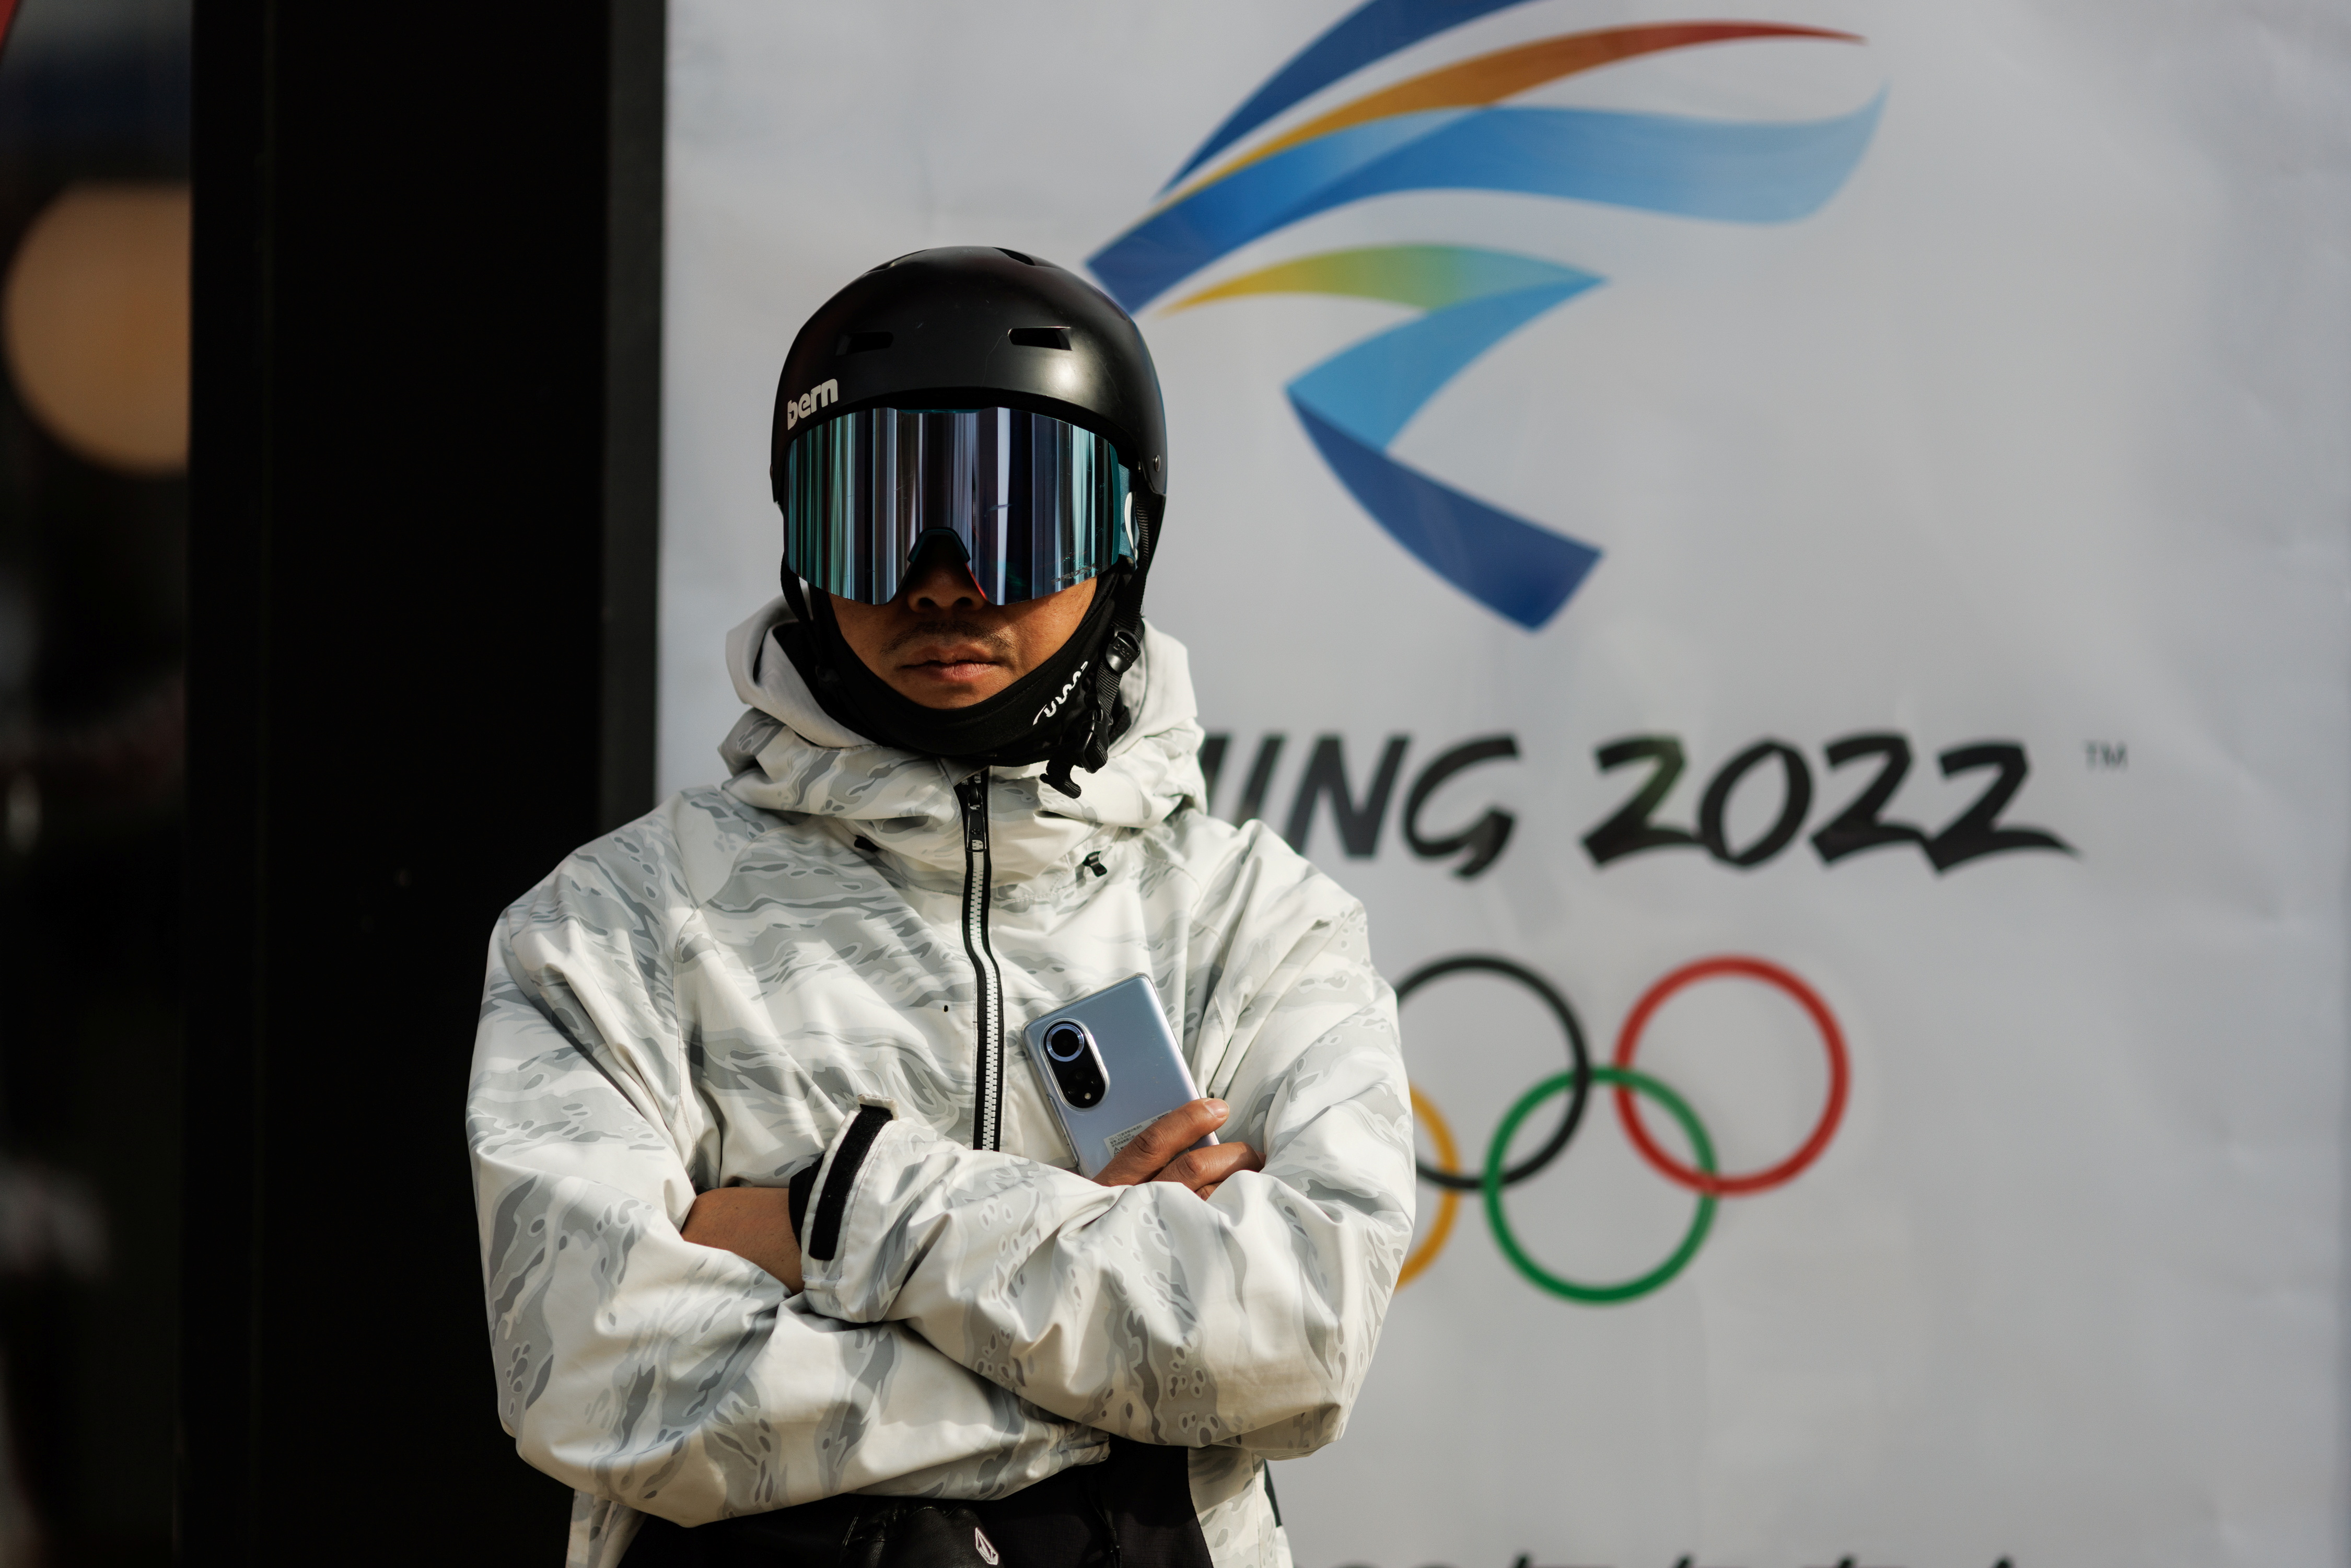 A snowboarder stands in front of the logo of the Beijing 2022 Winter Olympics in Zhangjiakou